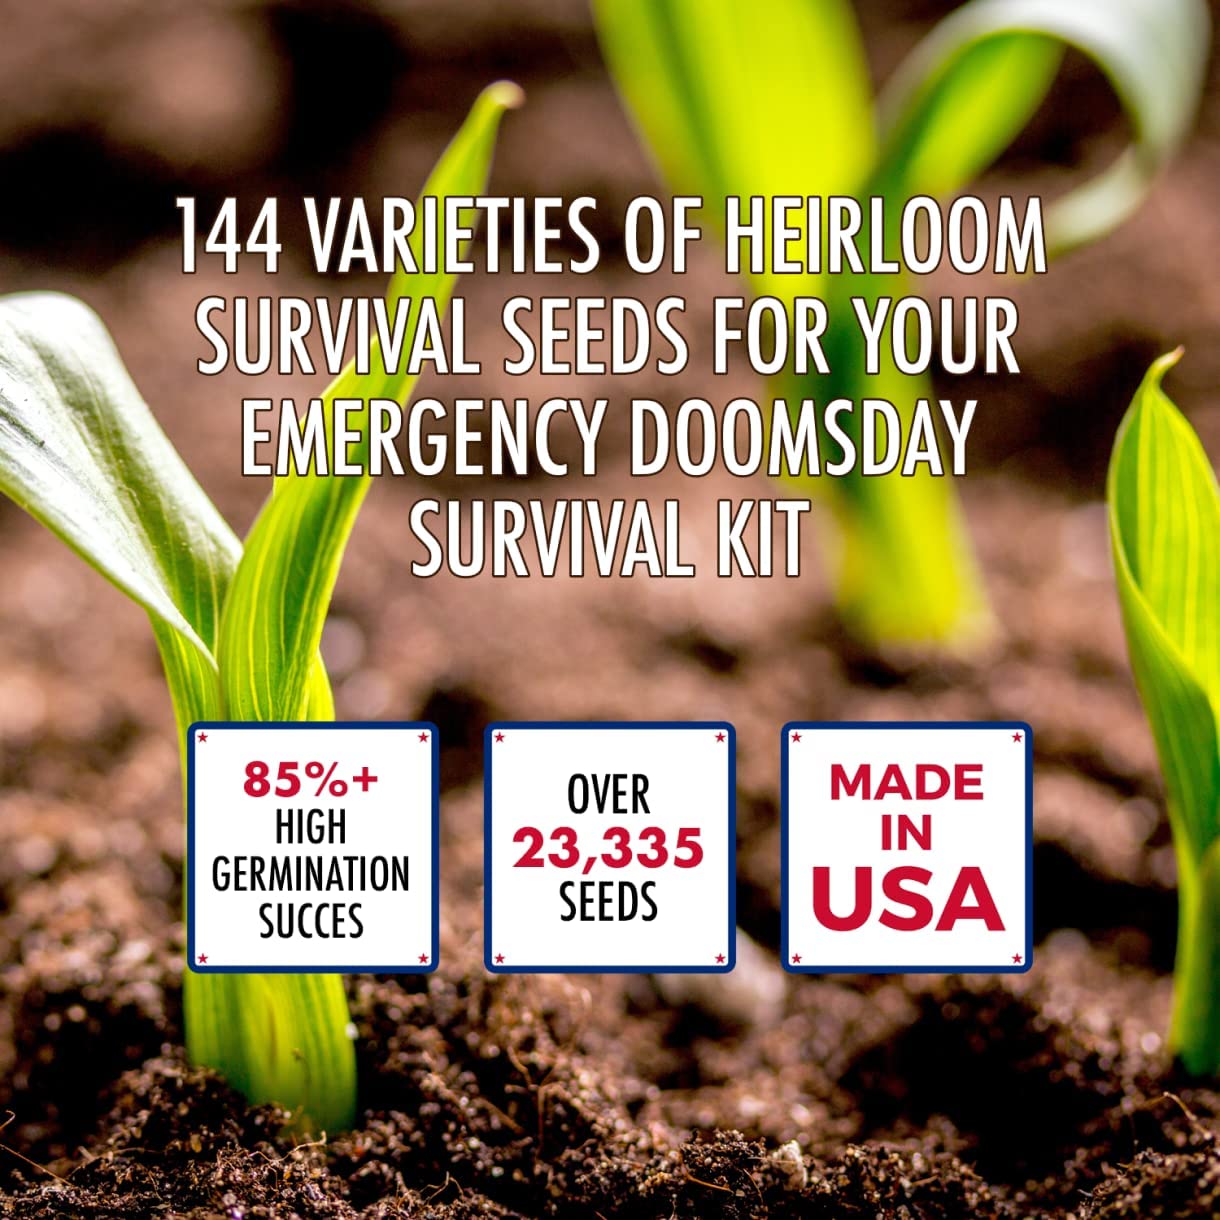 Survival Essentials Ultimate Heirloom Seed Vault, 144 Variety Packed in Superior Ammo Can, Over 23k Seeds for Planting Vegetables and Fruits, for Survival and Emergency Supply, Non-GMO, NO mRNA